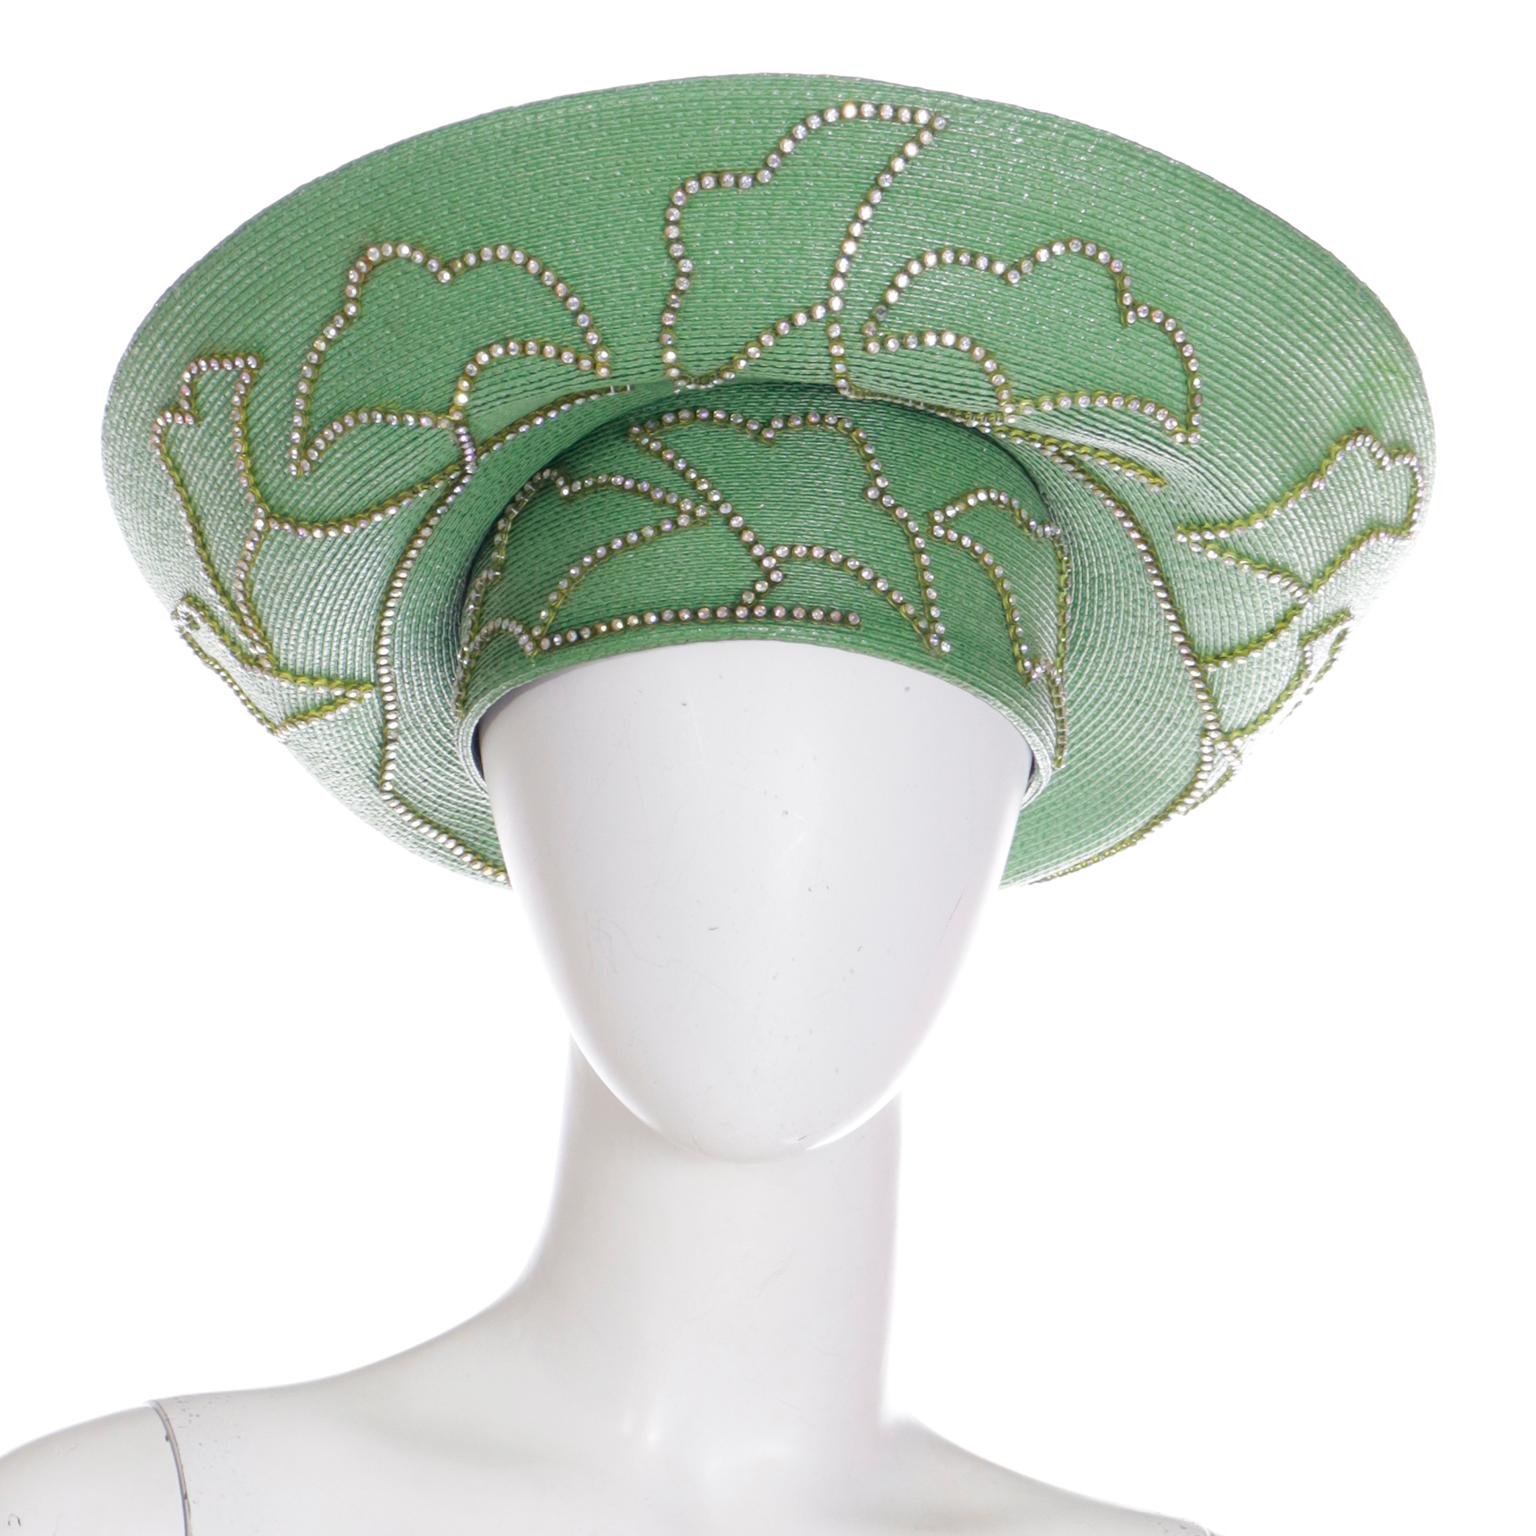 This stunning vintage Makins New York green coated straw hat is from an estate we acquired that included the most impressive hat collection we have ever come across! This stylish woman had a hat for every outfit for church and she dressed in nothing